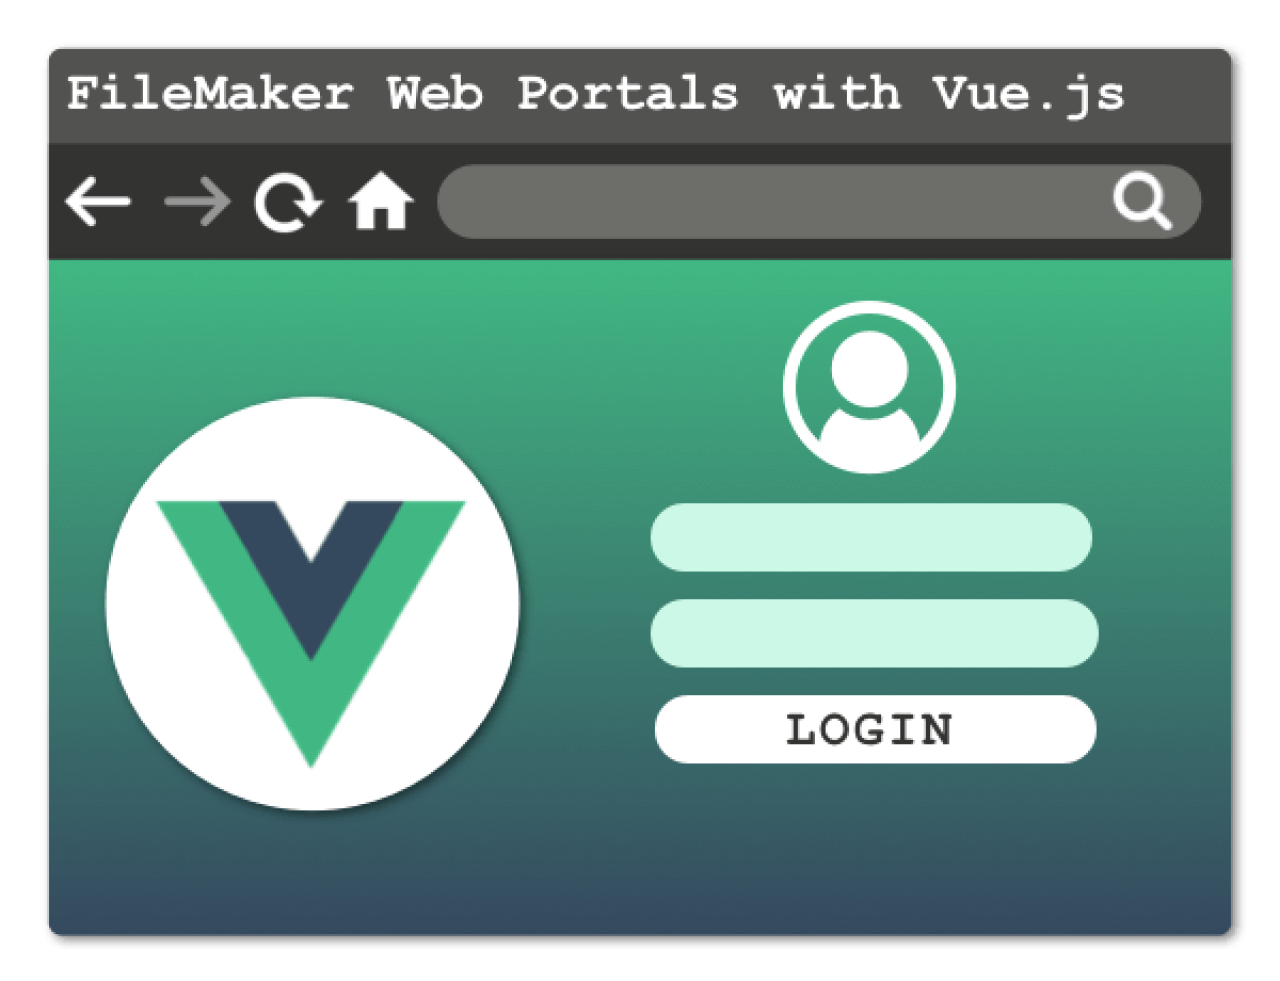 Web page login screen with the Vue logo.